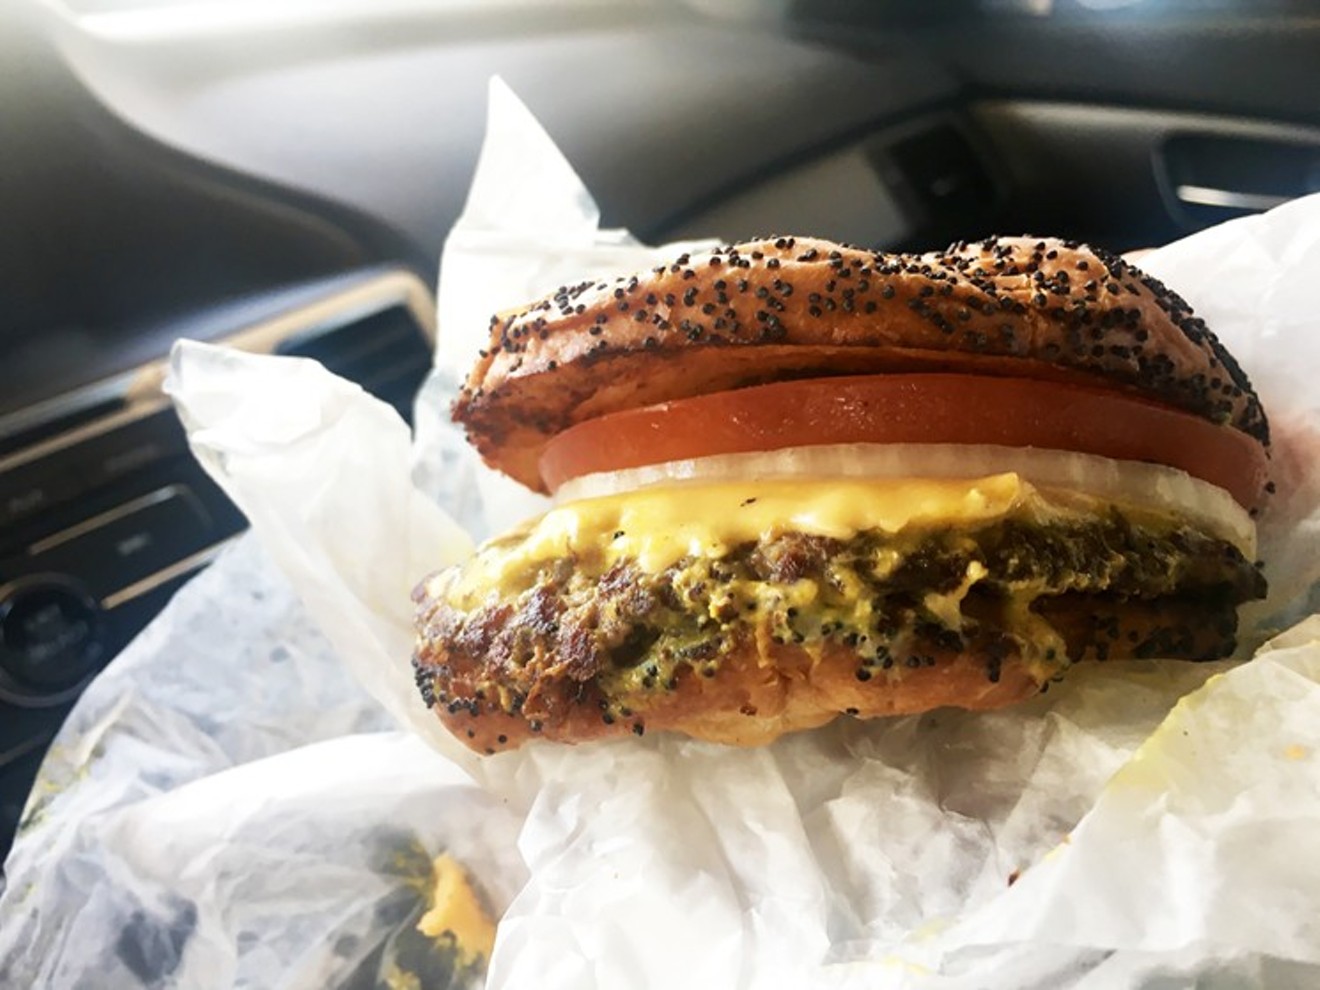 At $2.35 each, the burgers at Keller's Drive-In are a steal.